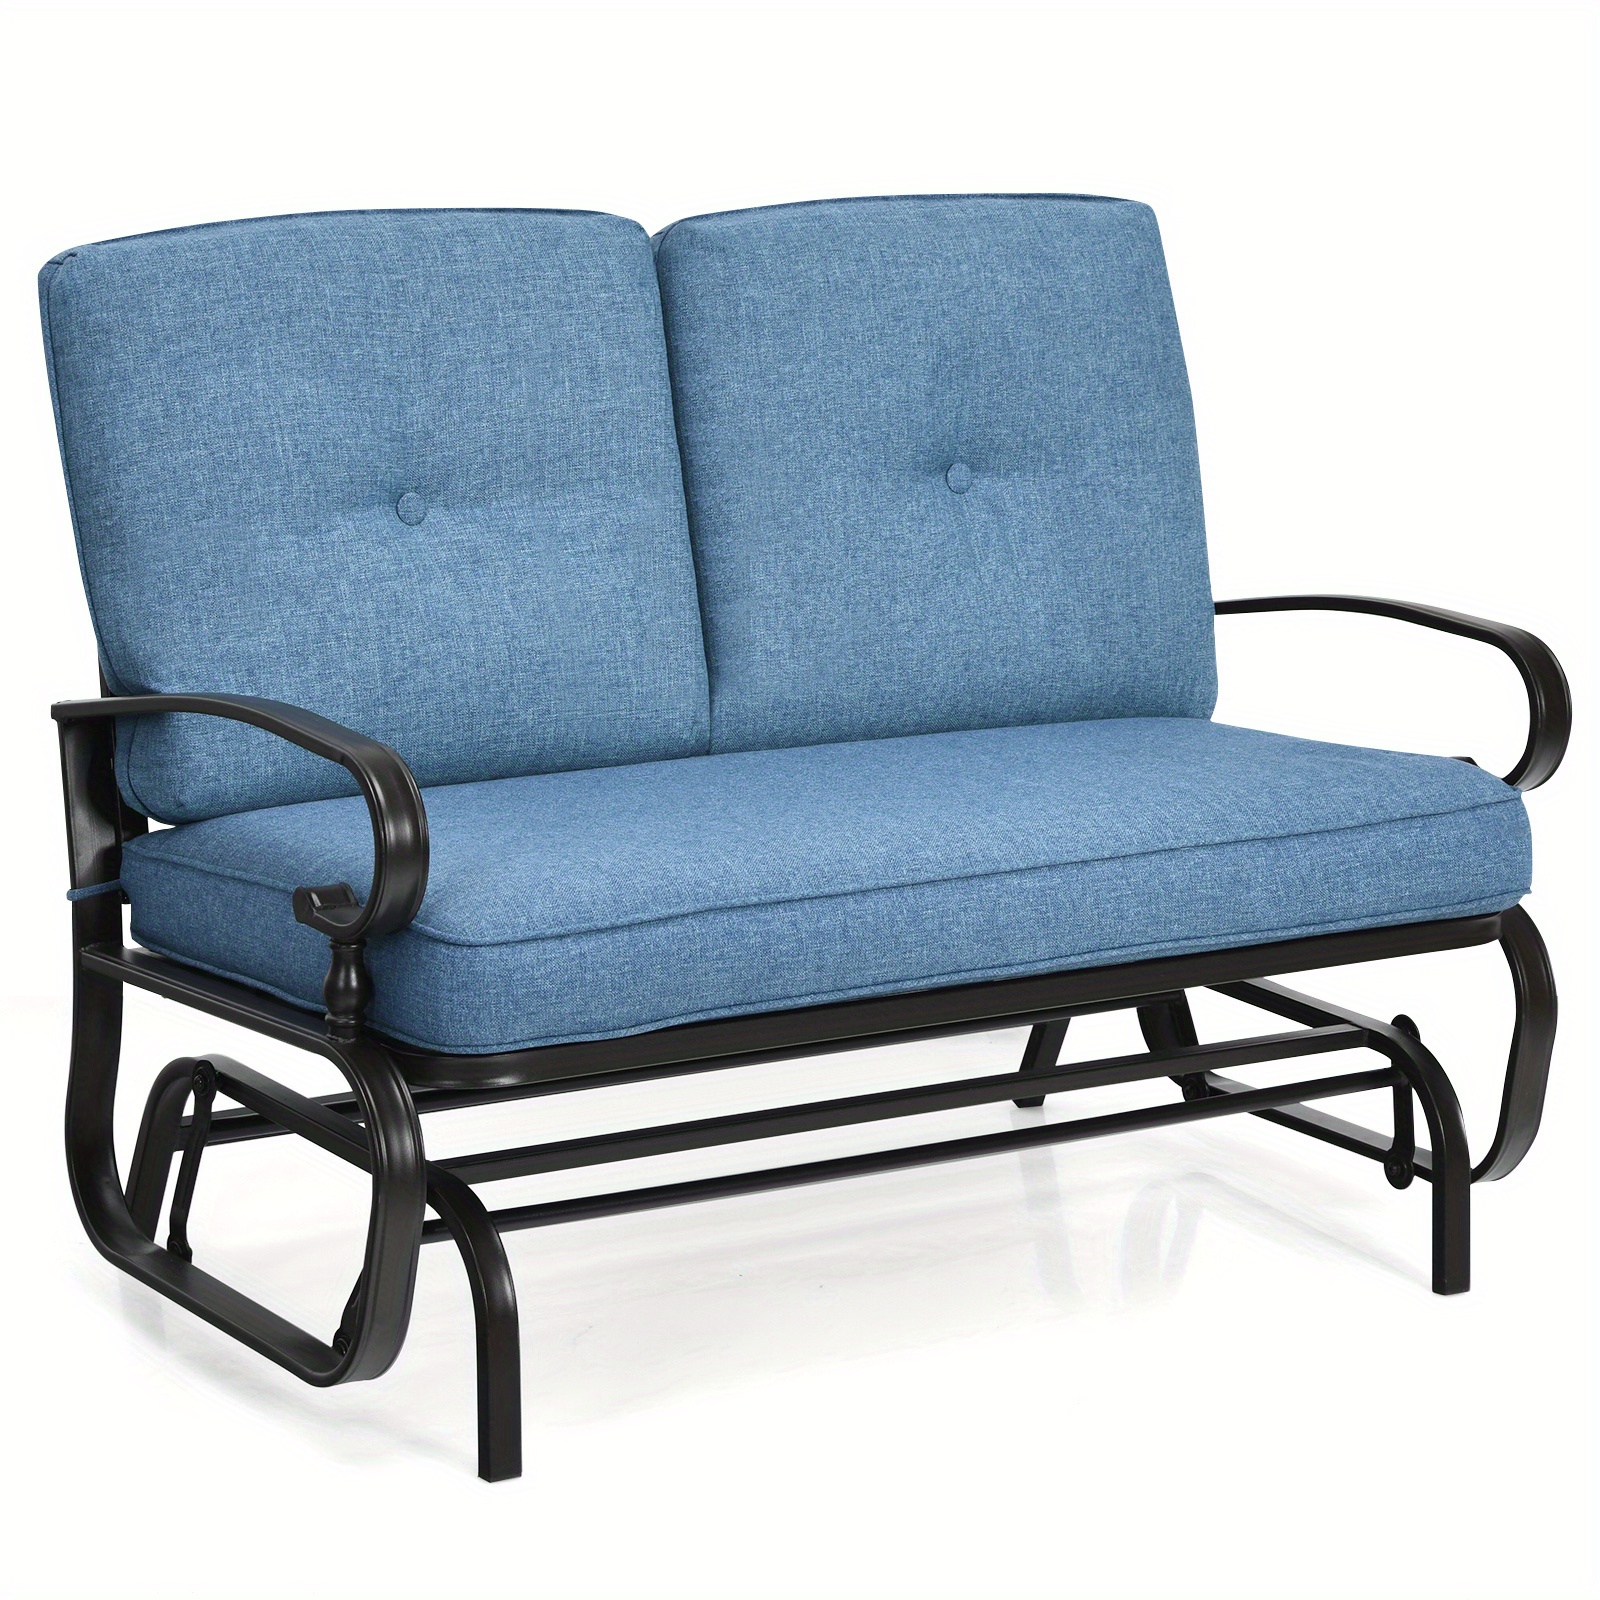 

2-person Outdoor Swing Glider Chair Bench Loveseat Cushioned Sofa Blue